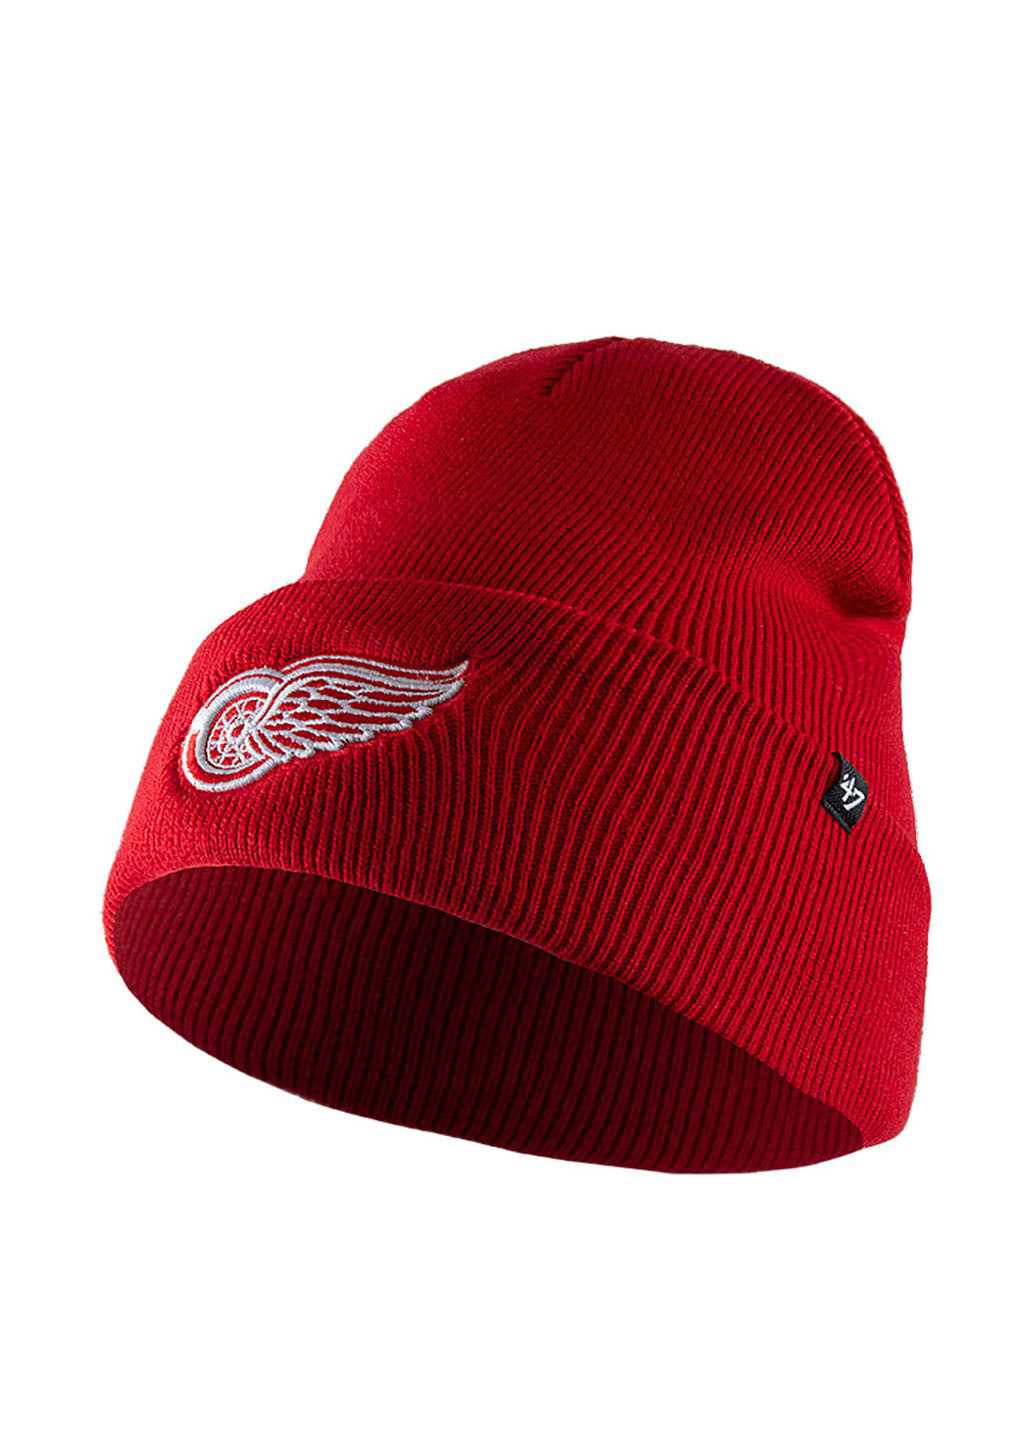 Шапка 47 nhl detroit red wings (223798720)